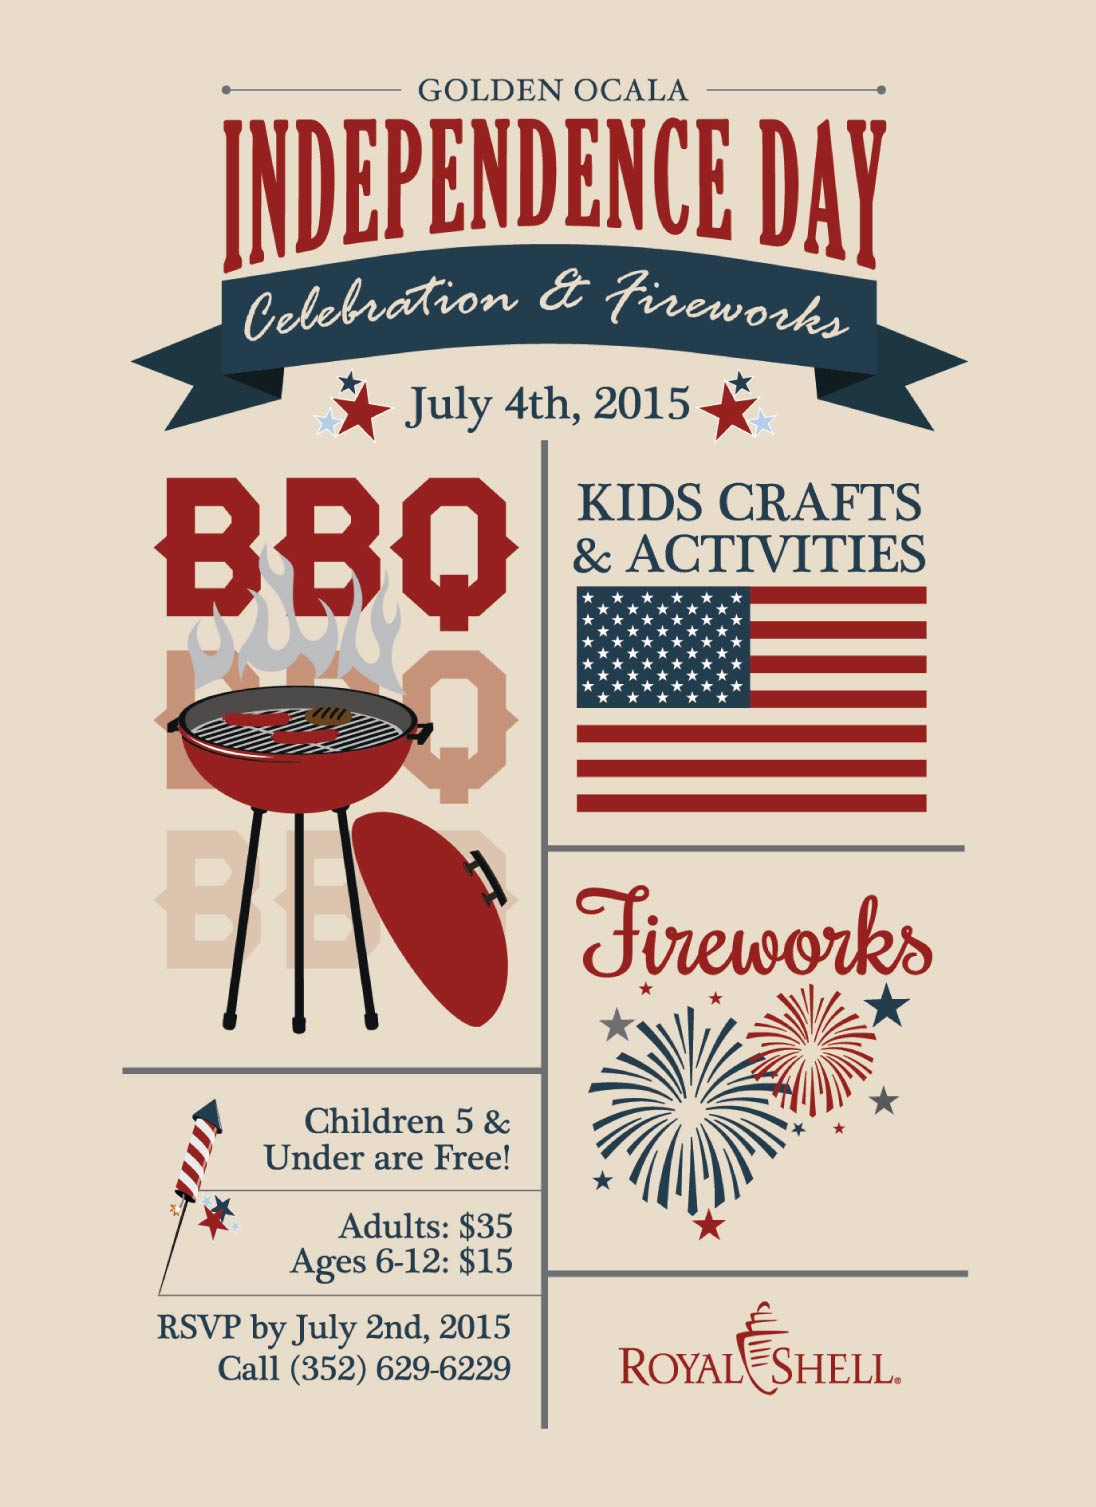 Celebrate the Fourth of July at Golden Ocala